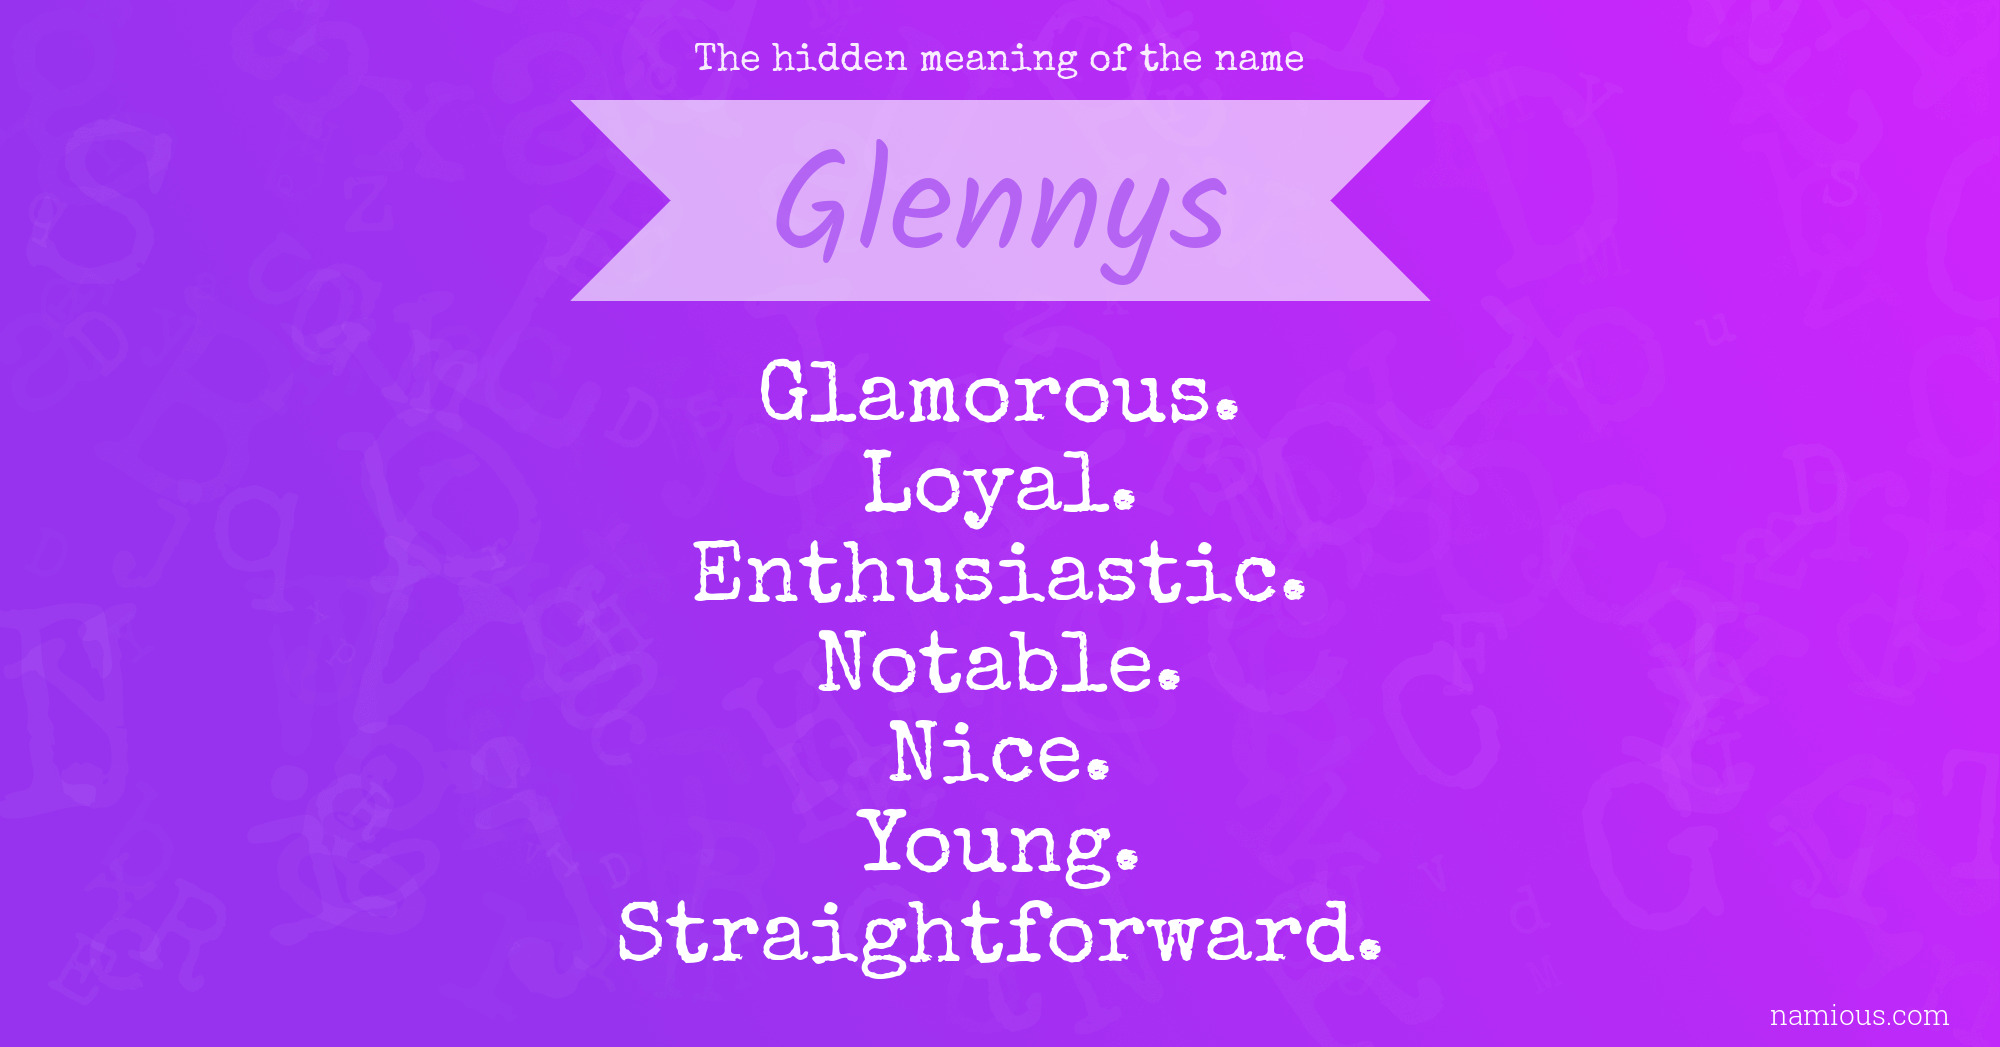 The hidden meaning of the name Glennys